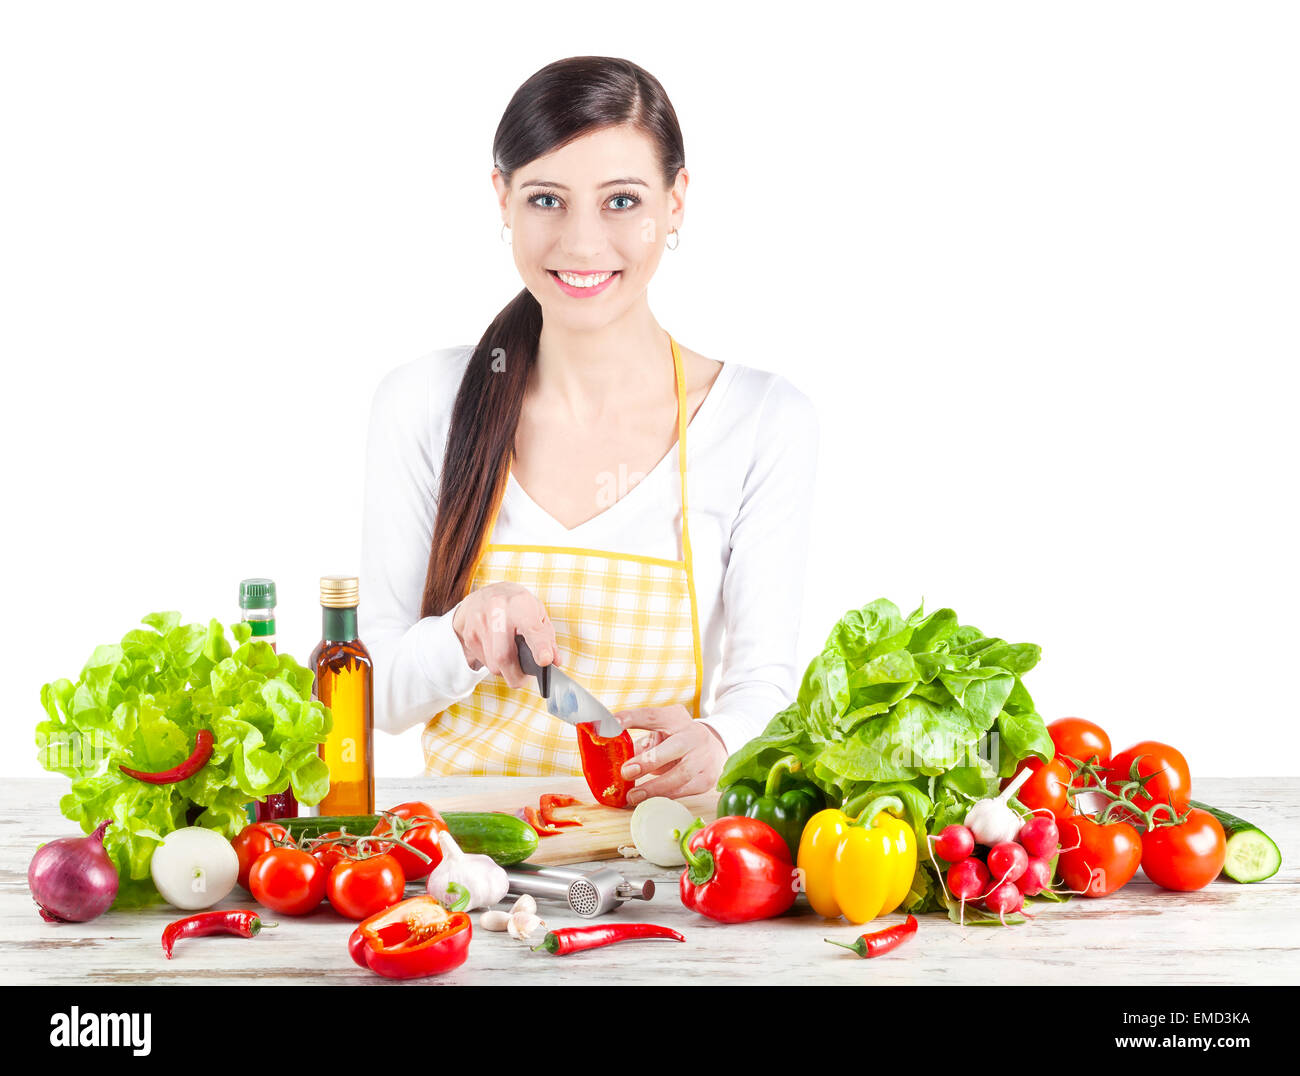 Smiling woman preparing salad. Healthy food and diet concept. Isolated on white. Stock Photo